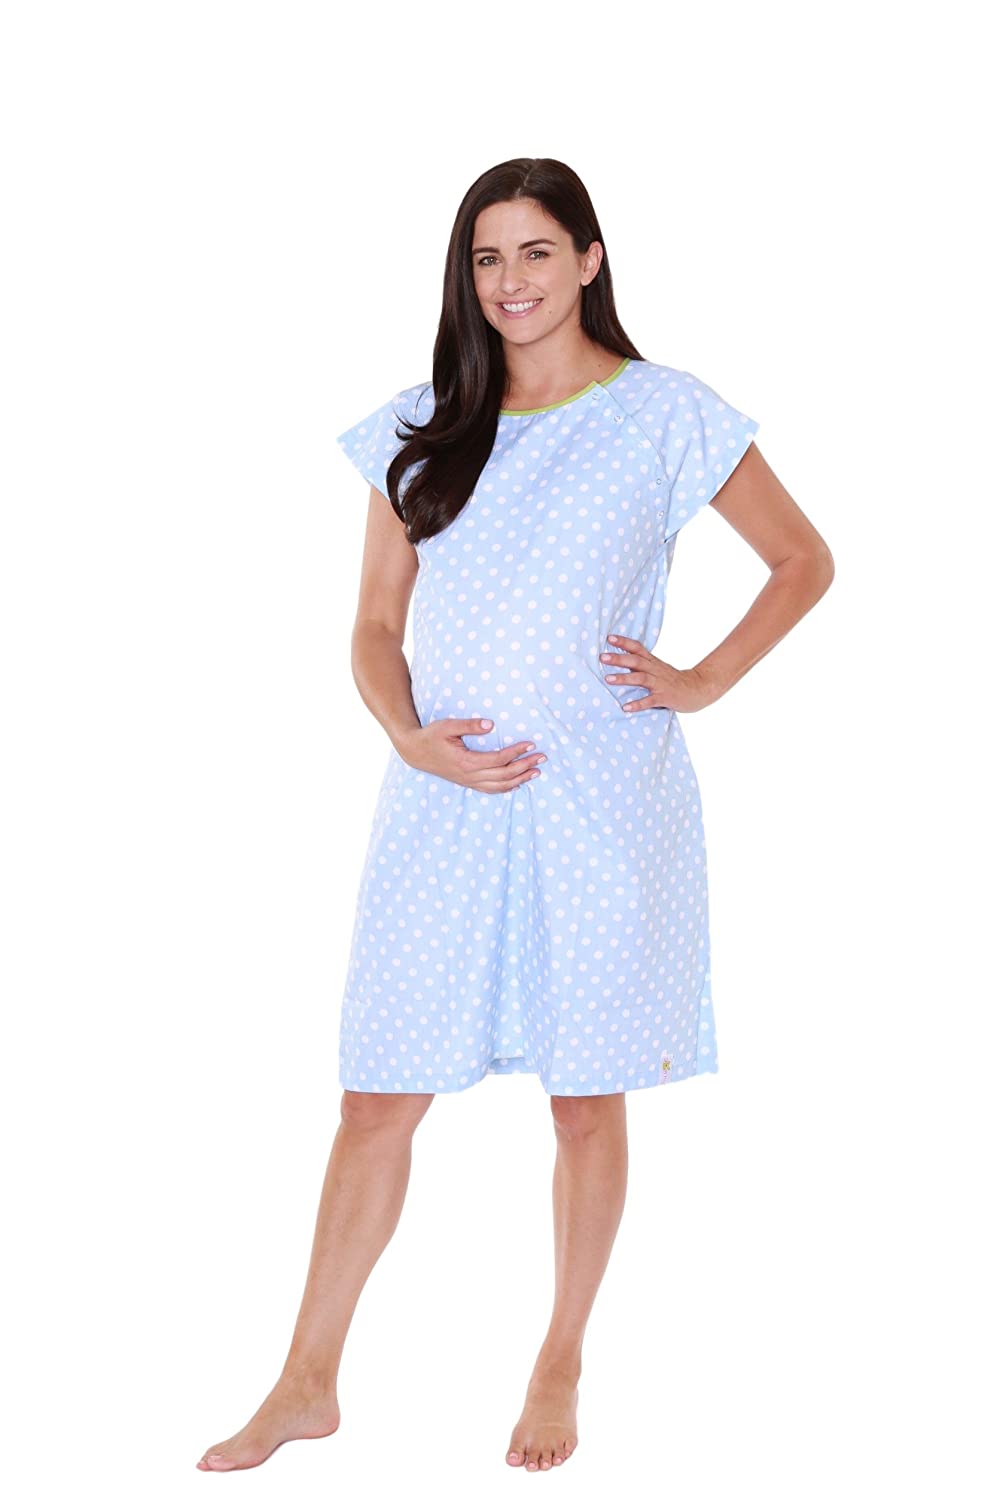 Baby Be Mine Labor & Delivery Maternity Hospital Gown